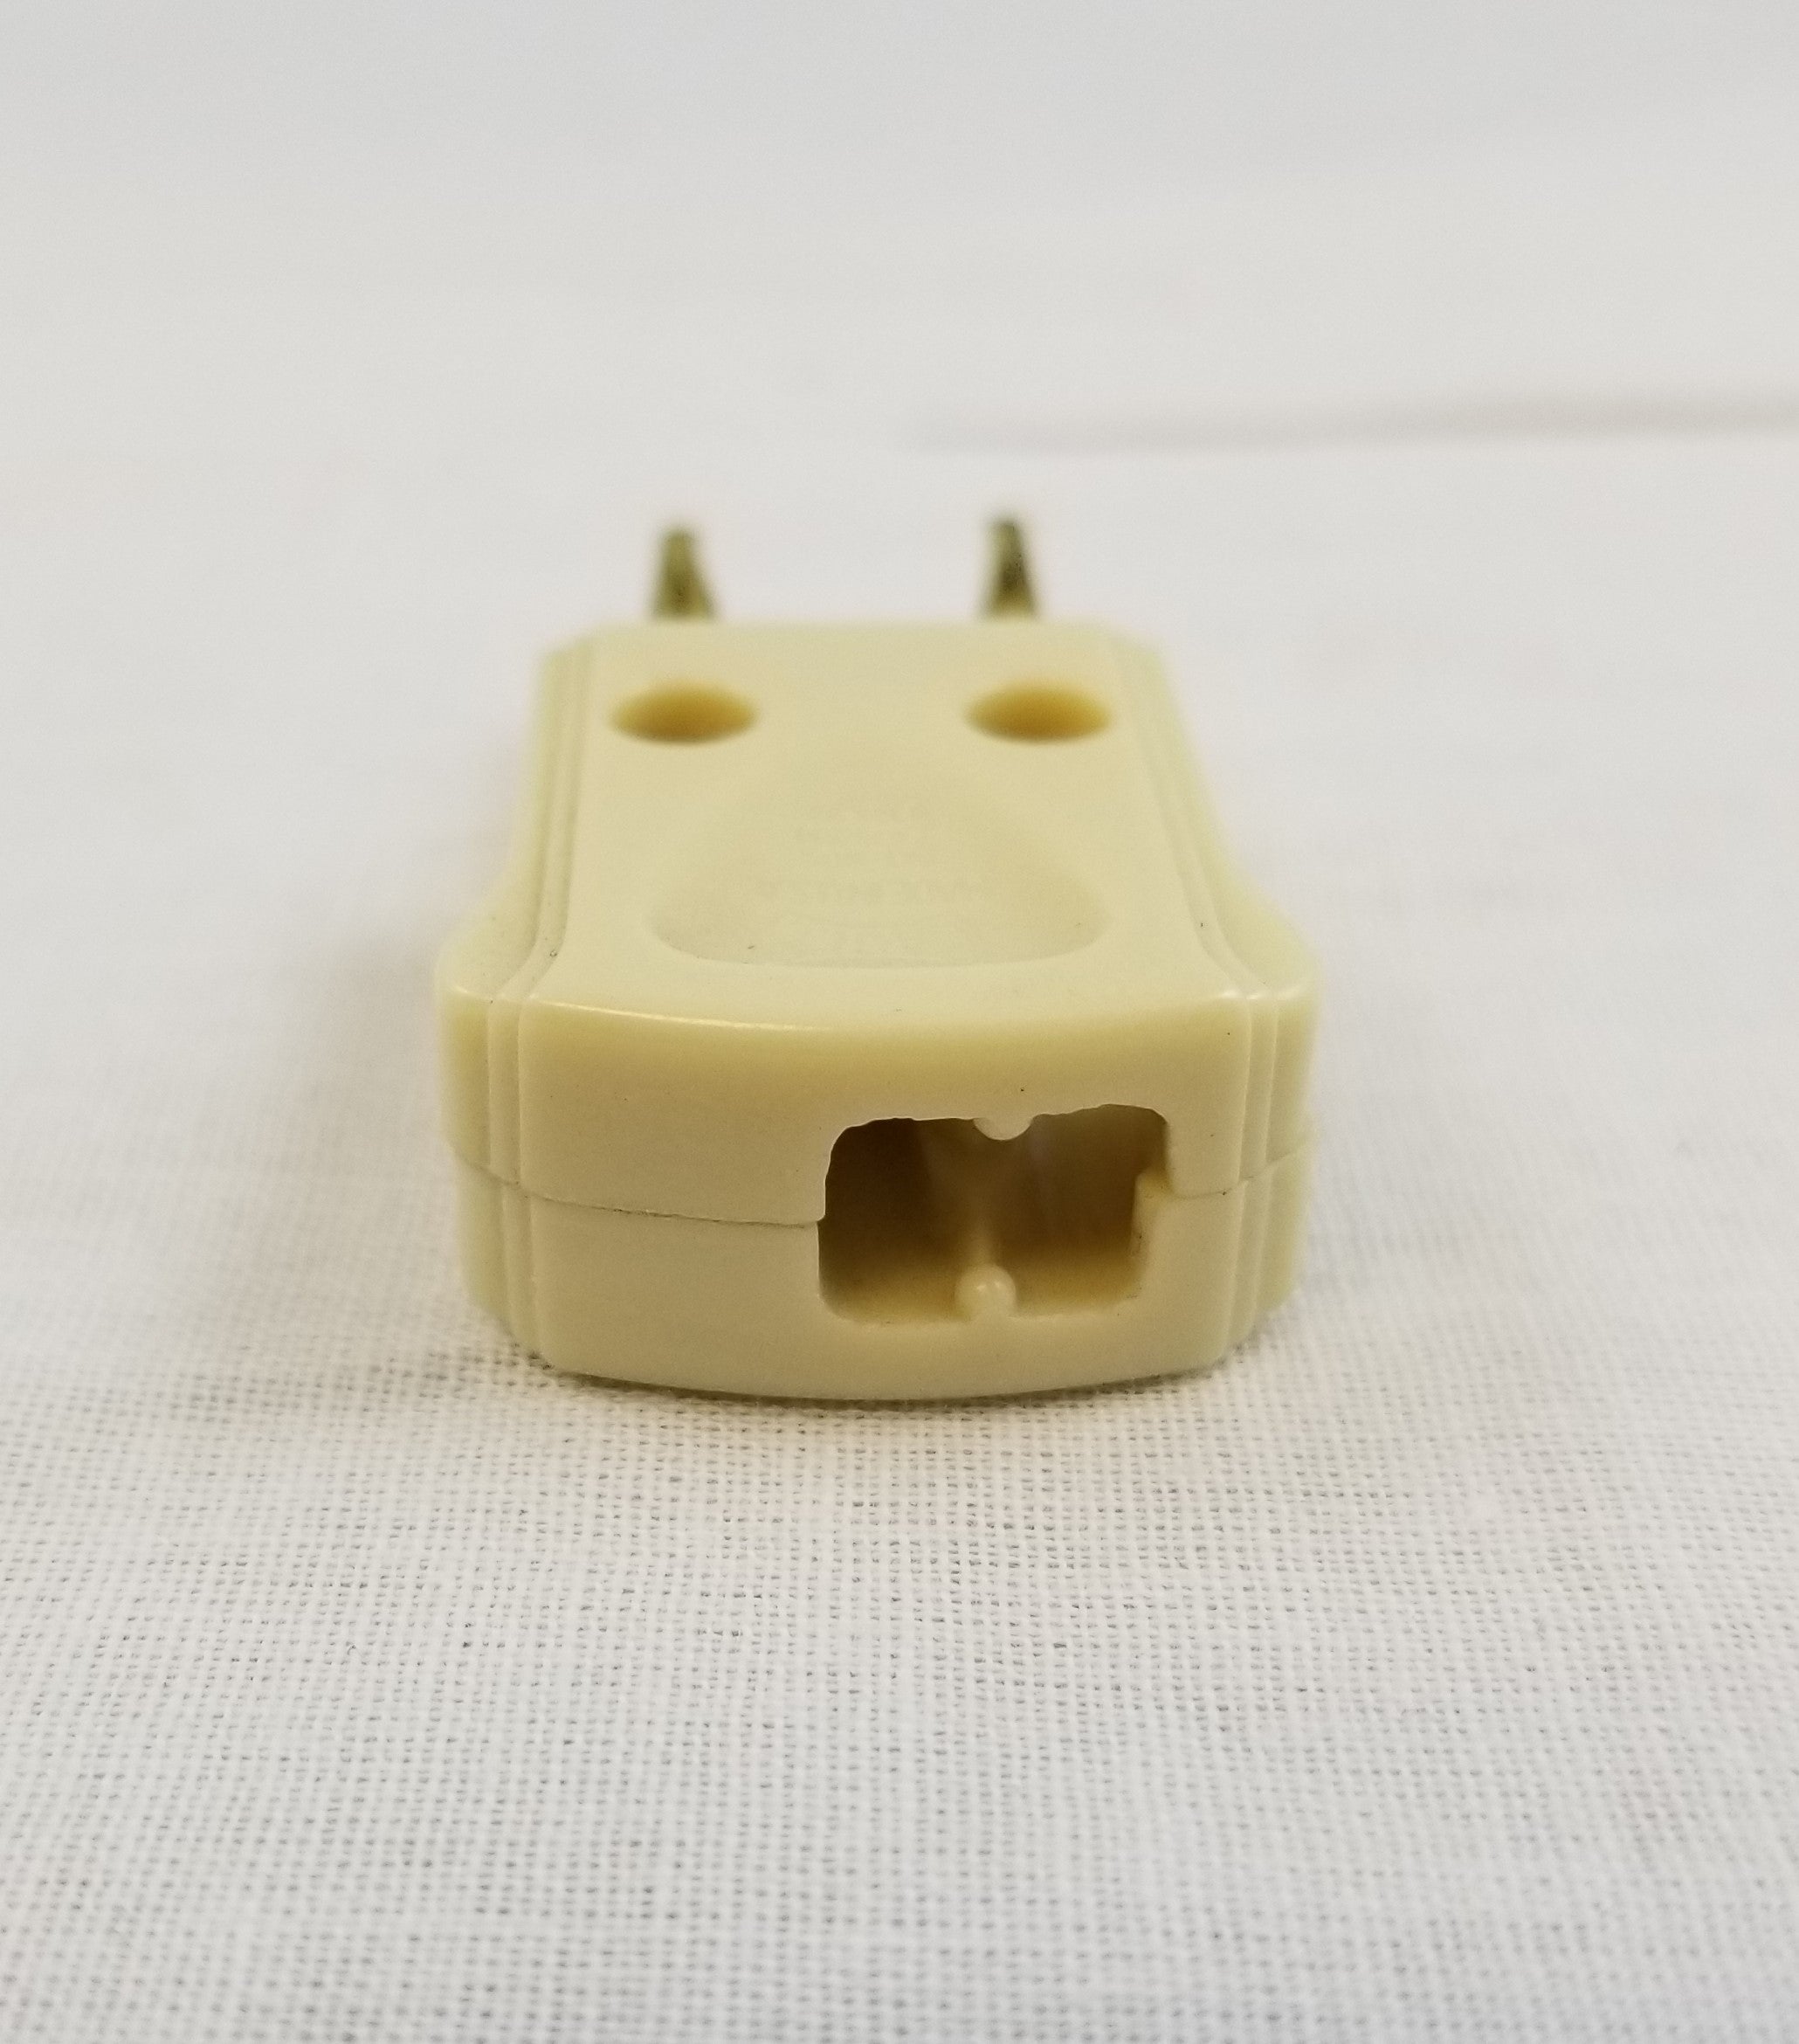 C.S.A. Approved Push/Pull Brass Spring Plug in Ivory.